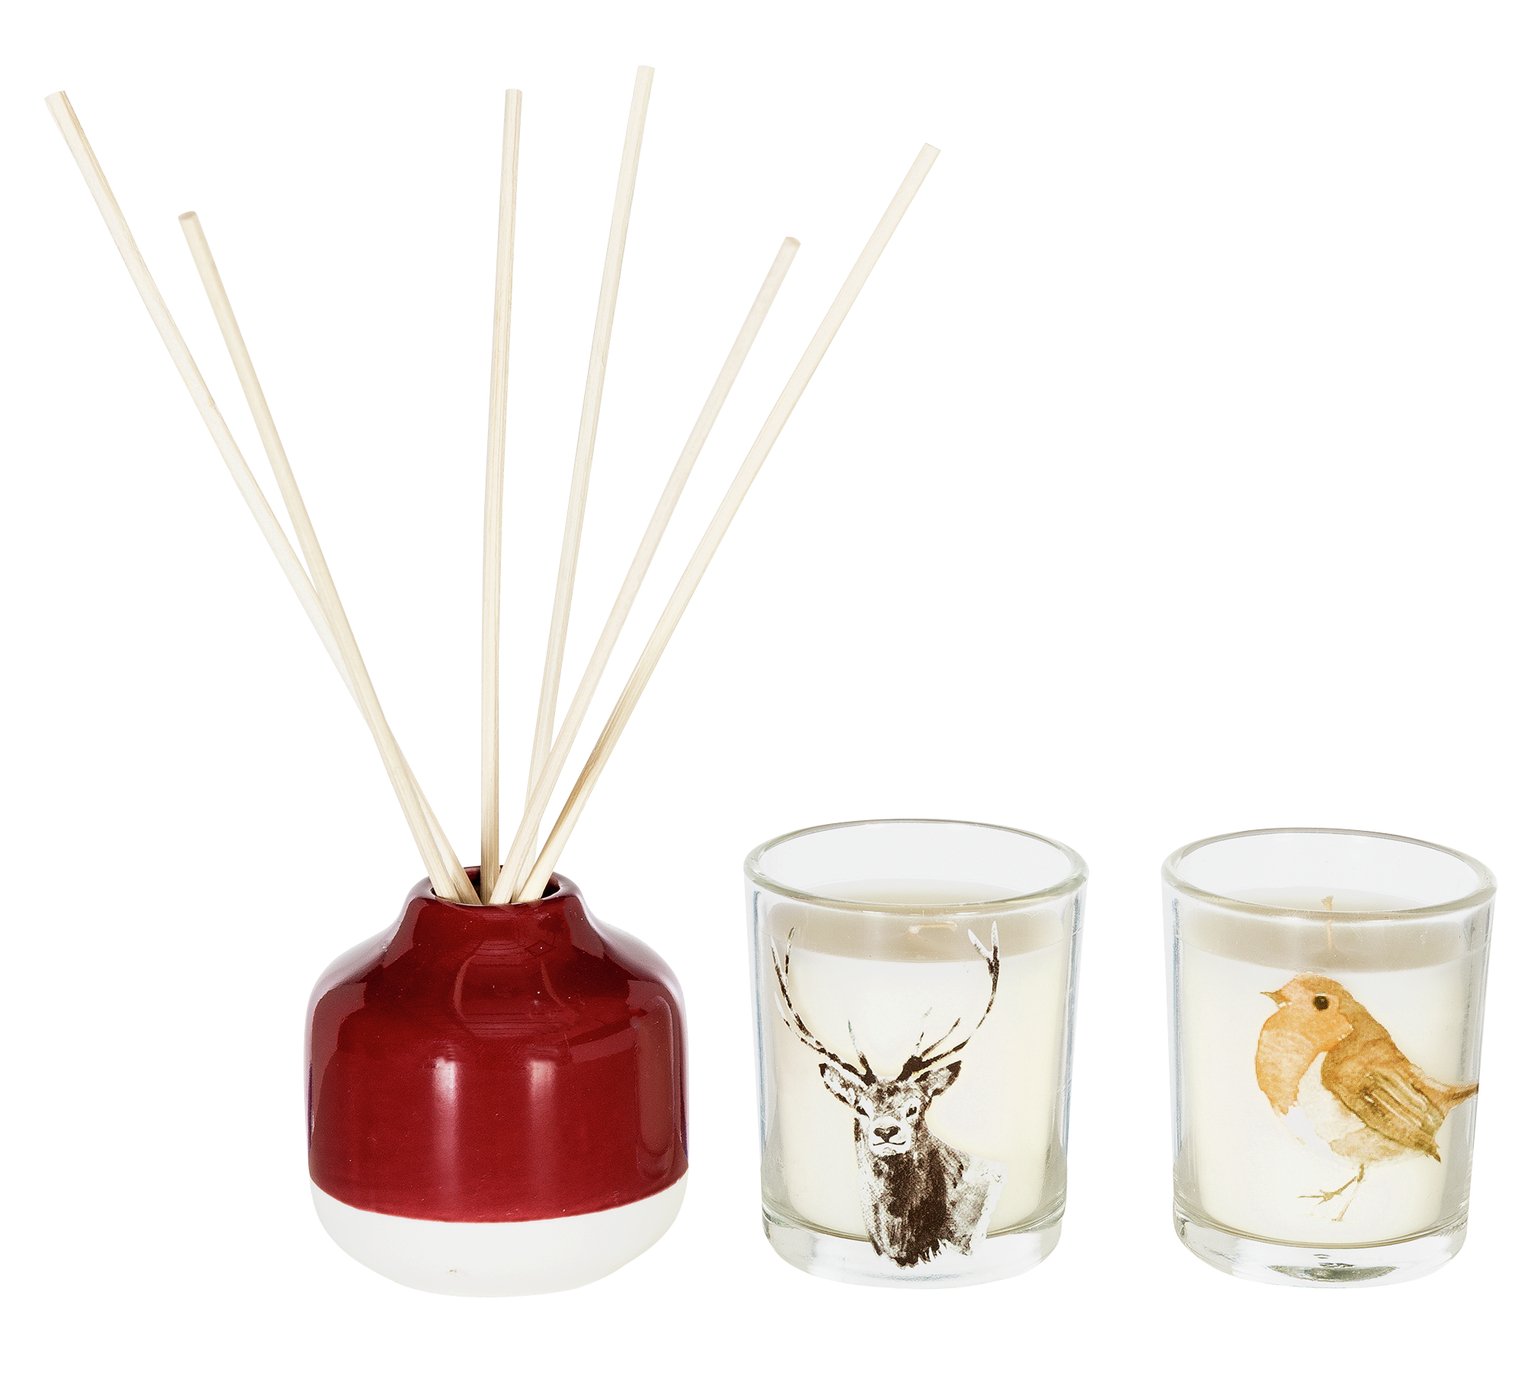 Sainsbury's Home Christmas Spice Diffuser and Votive Set